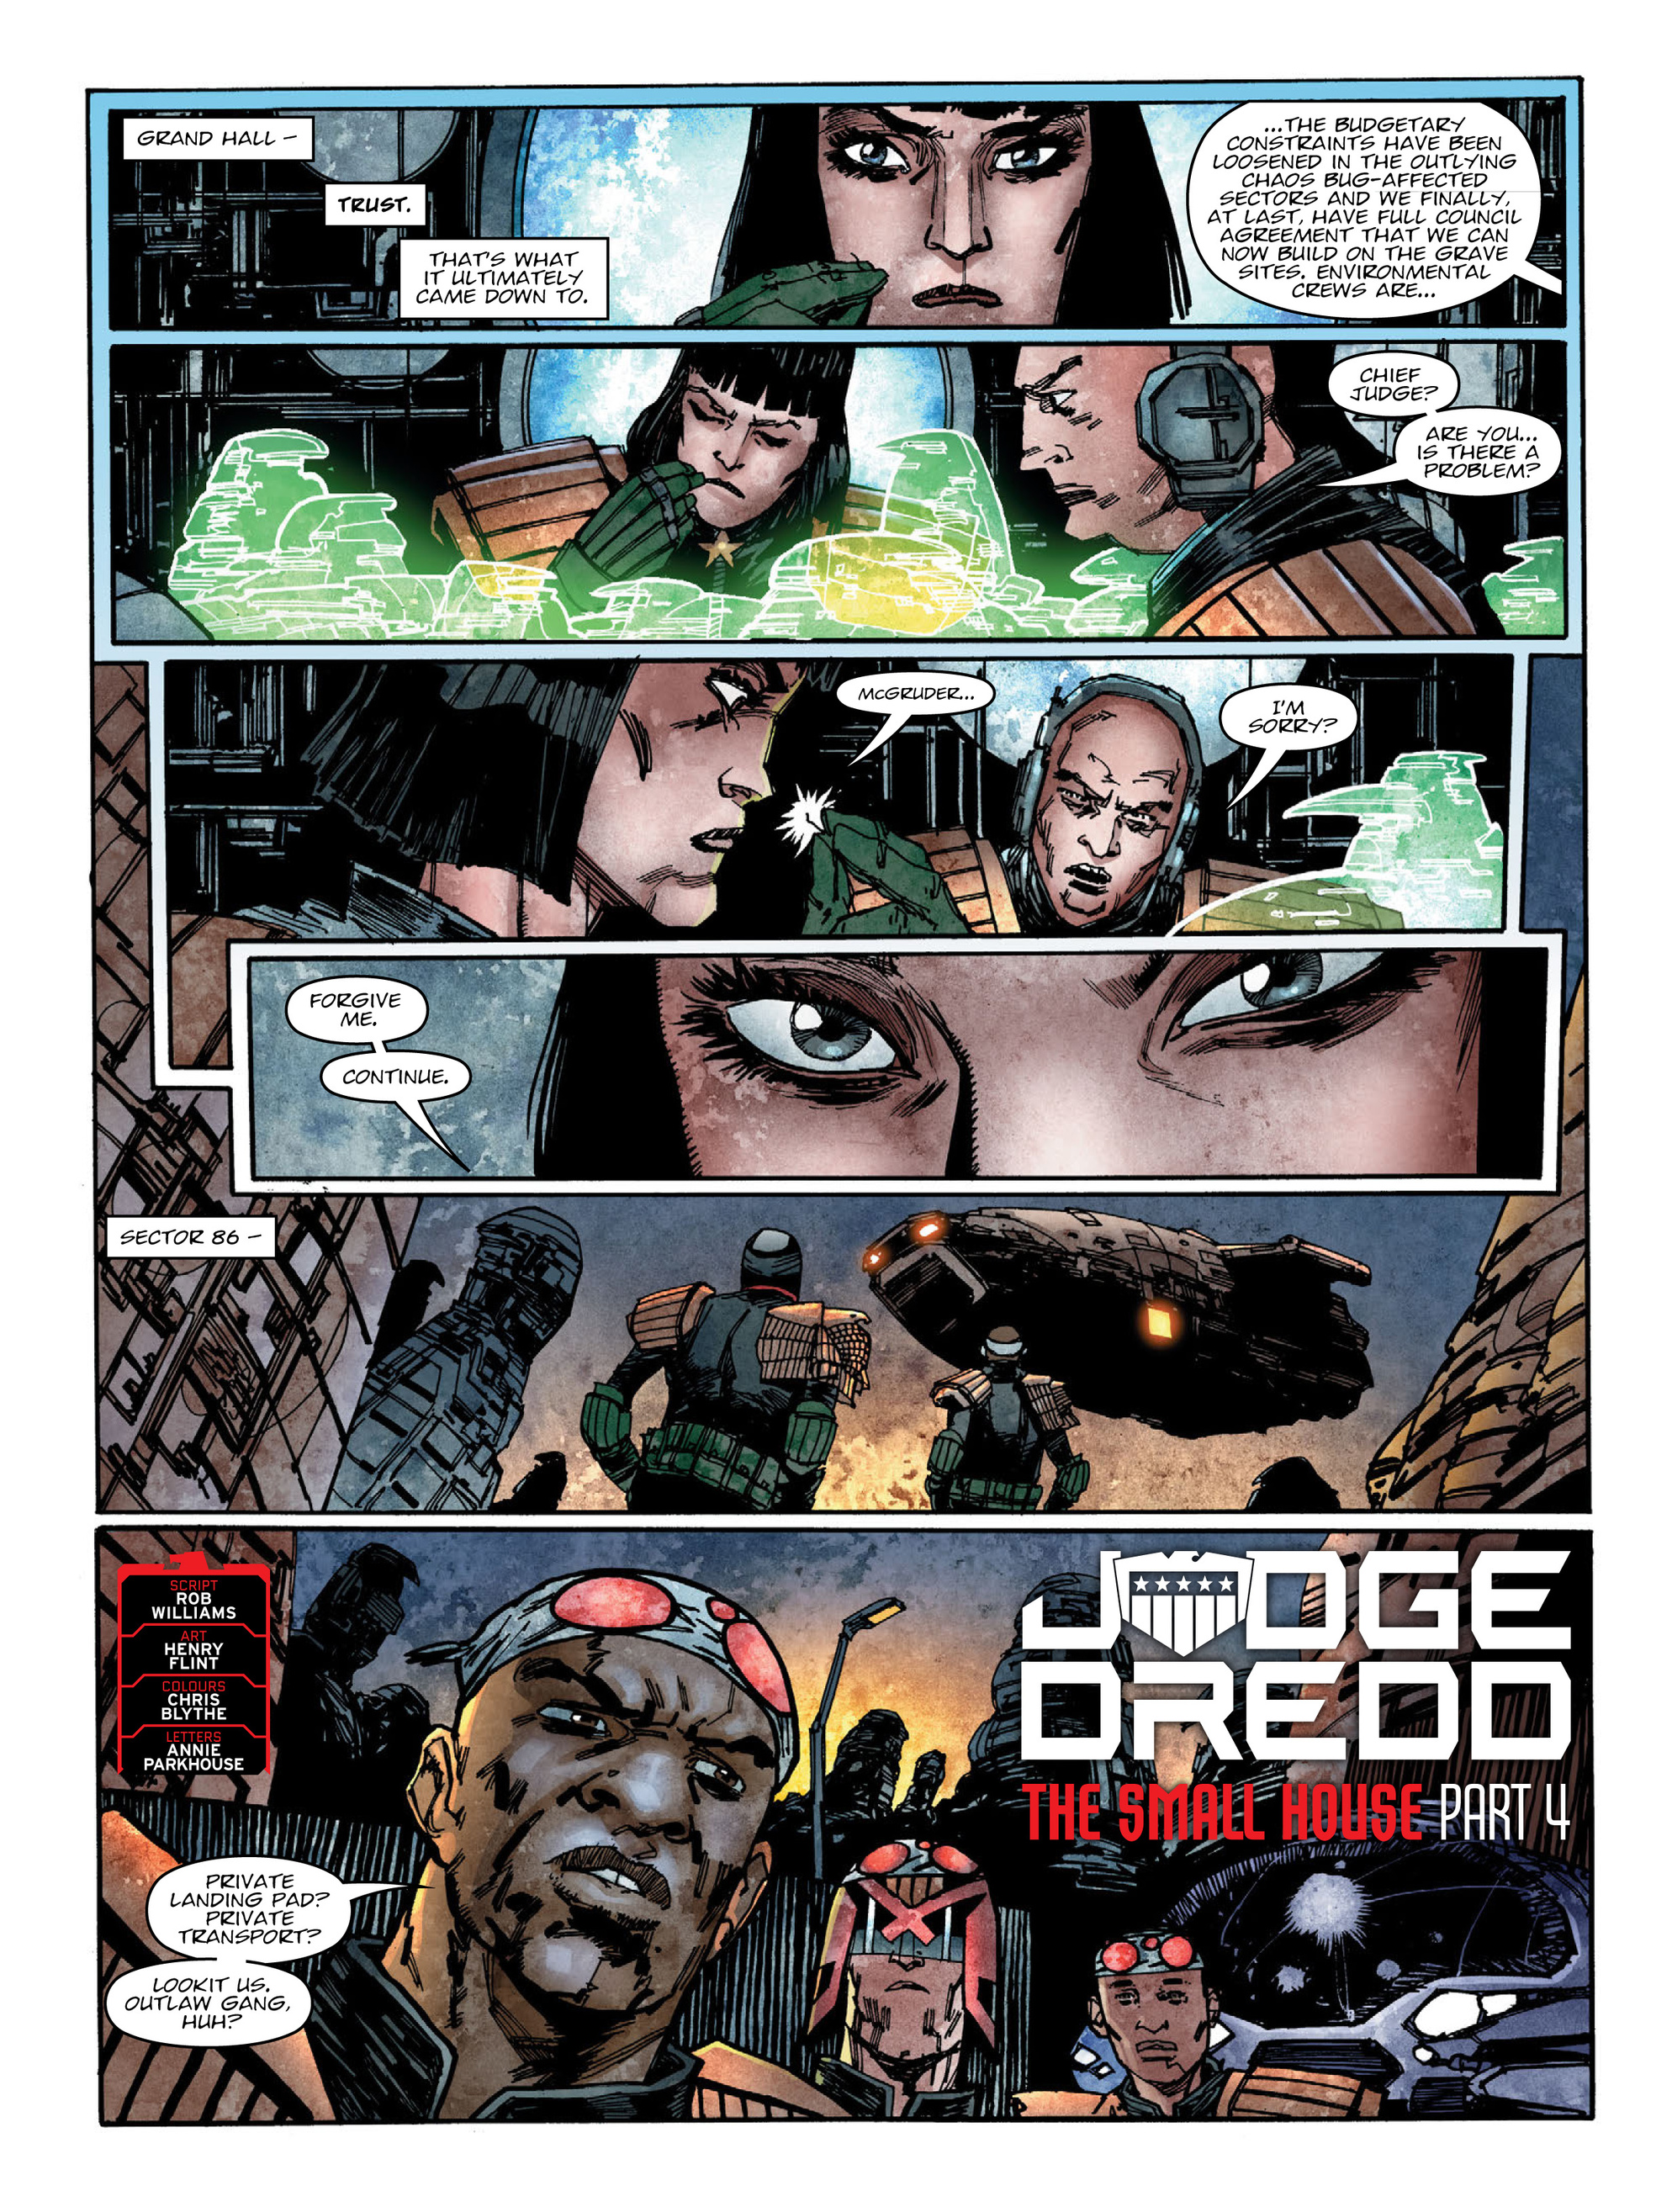 2000 AD: Chapter 2103 - Page 3